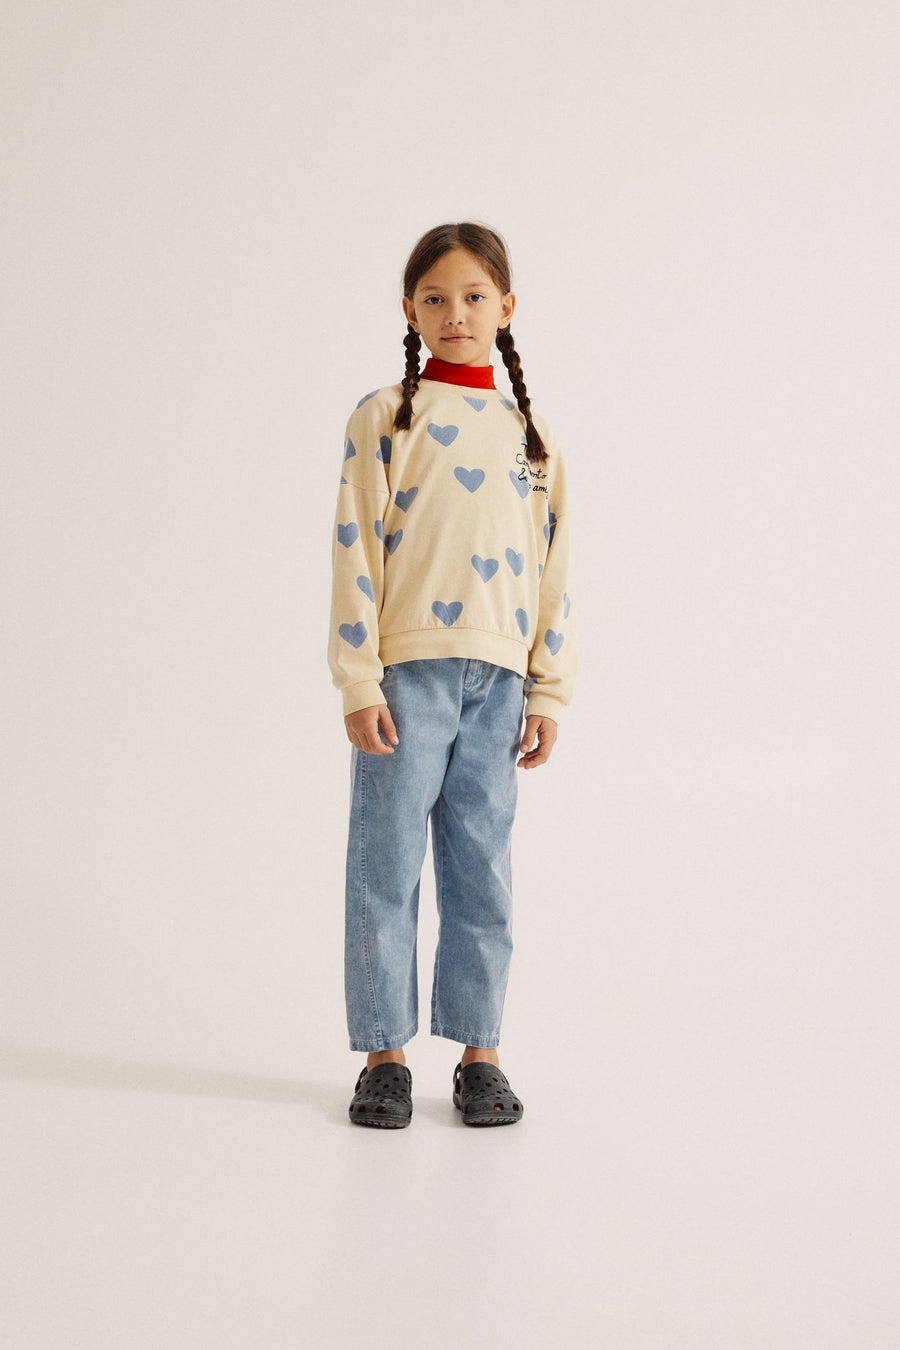 The Campamento - Hearts oversized kids sweater - Yellow